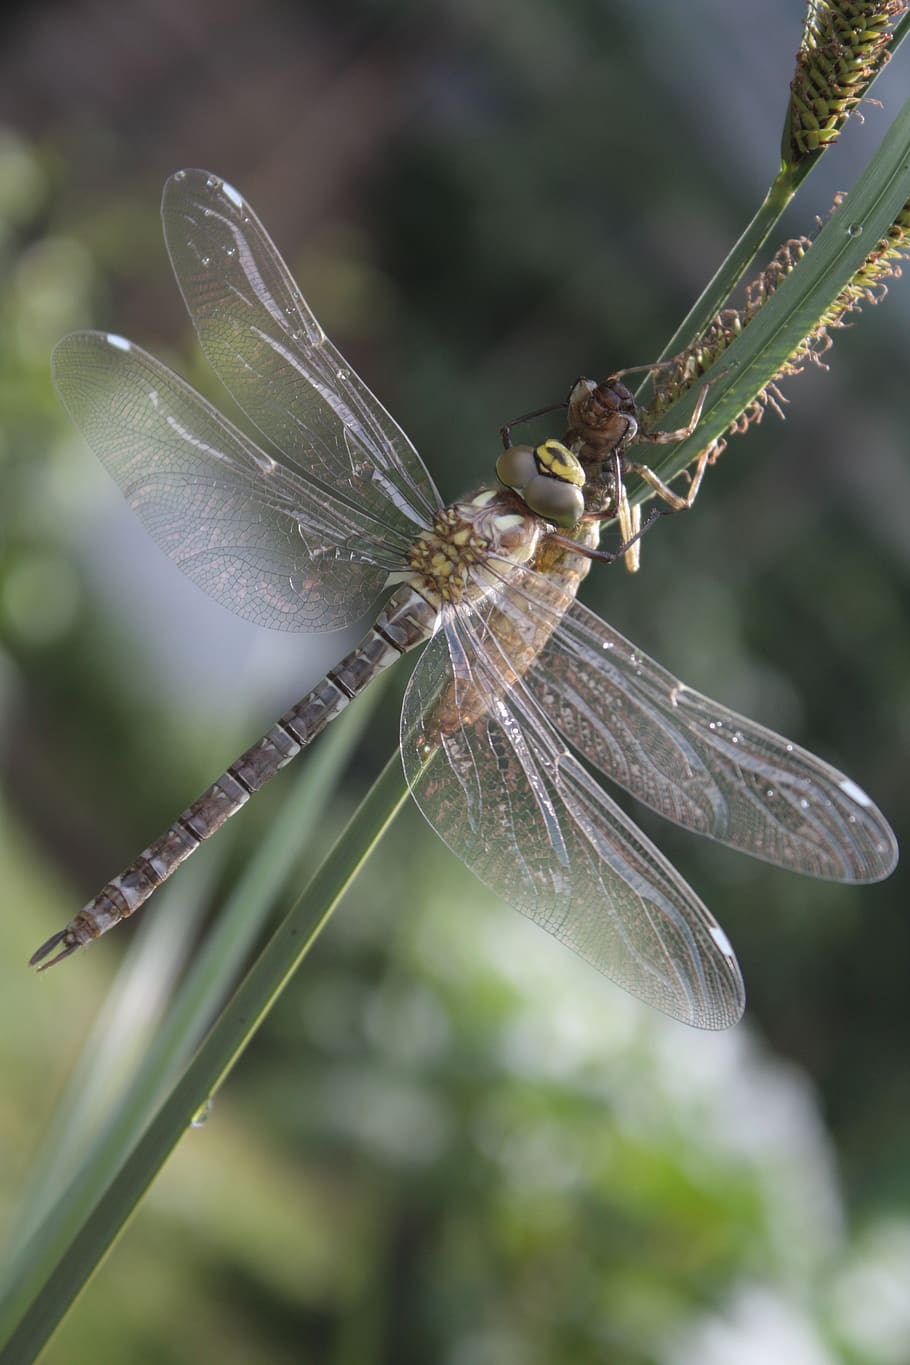 dragonfly, dragonflies, aeshna, hawker, close up, flight insect, insect, pond, wing, garden pond